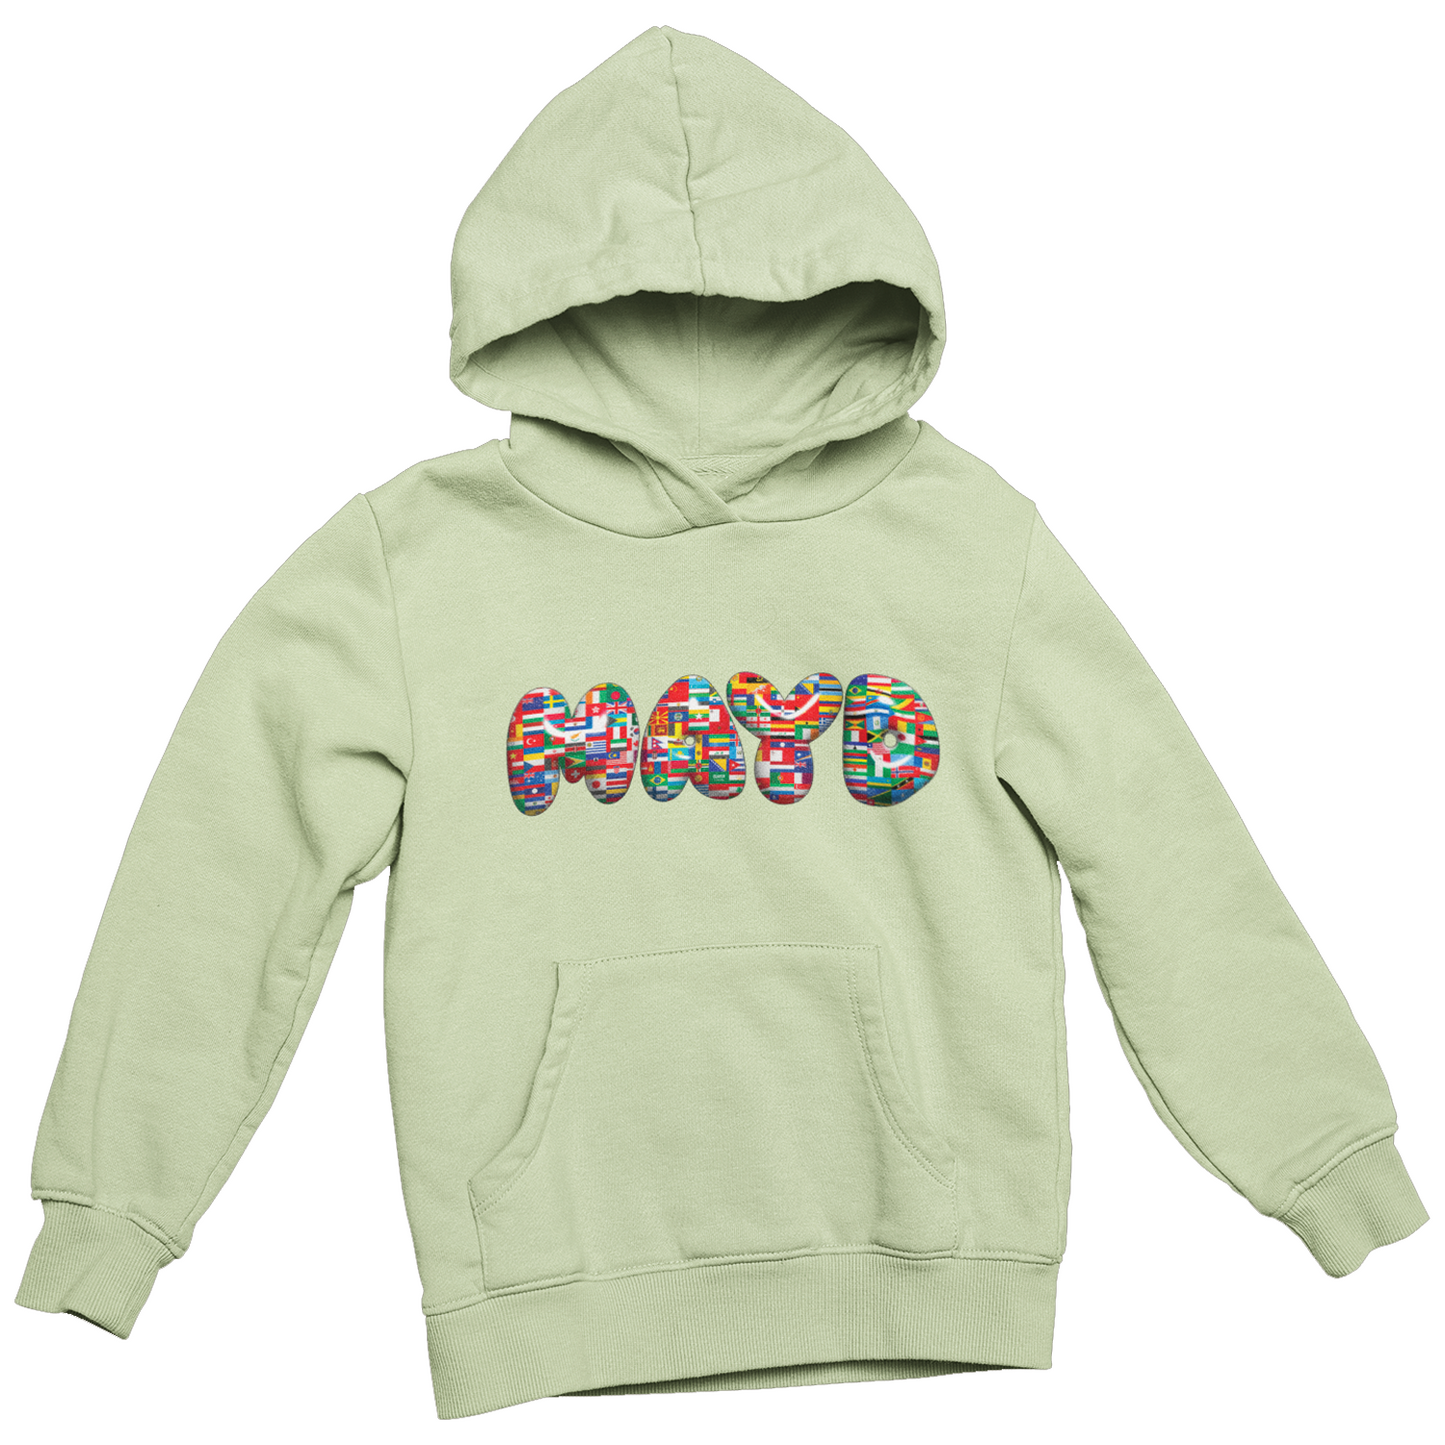 MAYD in America "United Nations" Flag Day Hoodie